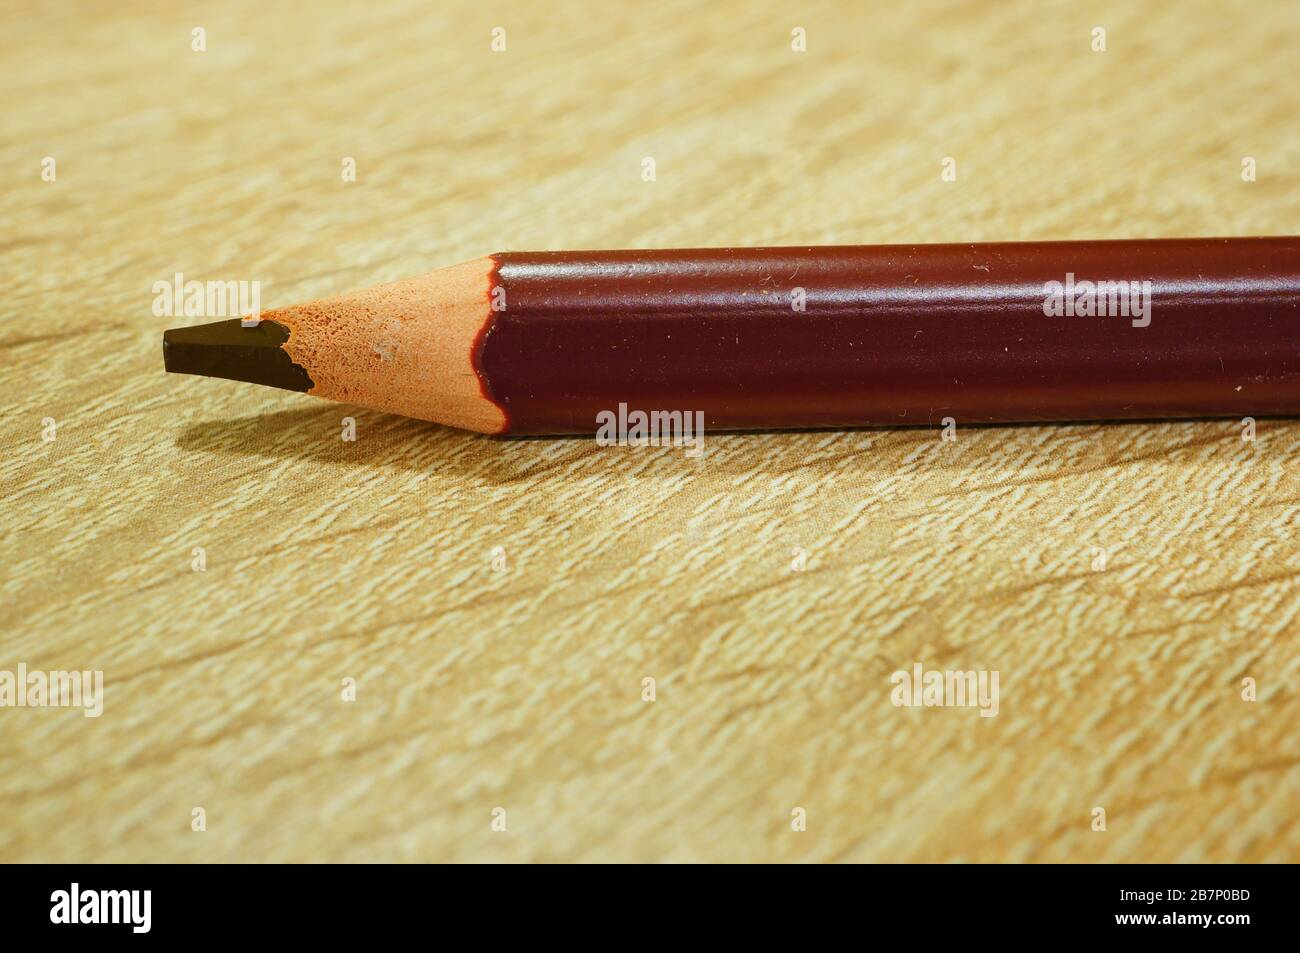 Closeup shot of a colored pencil on a wooden surface Stock Photo